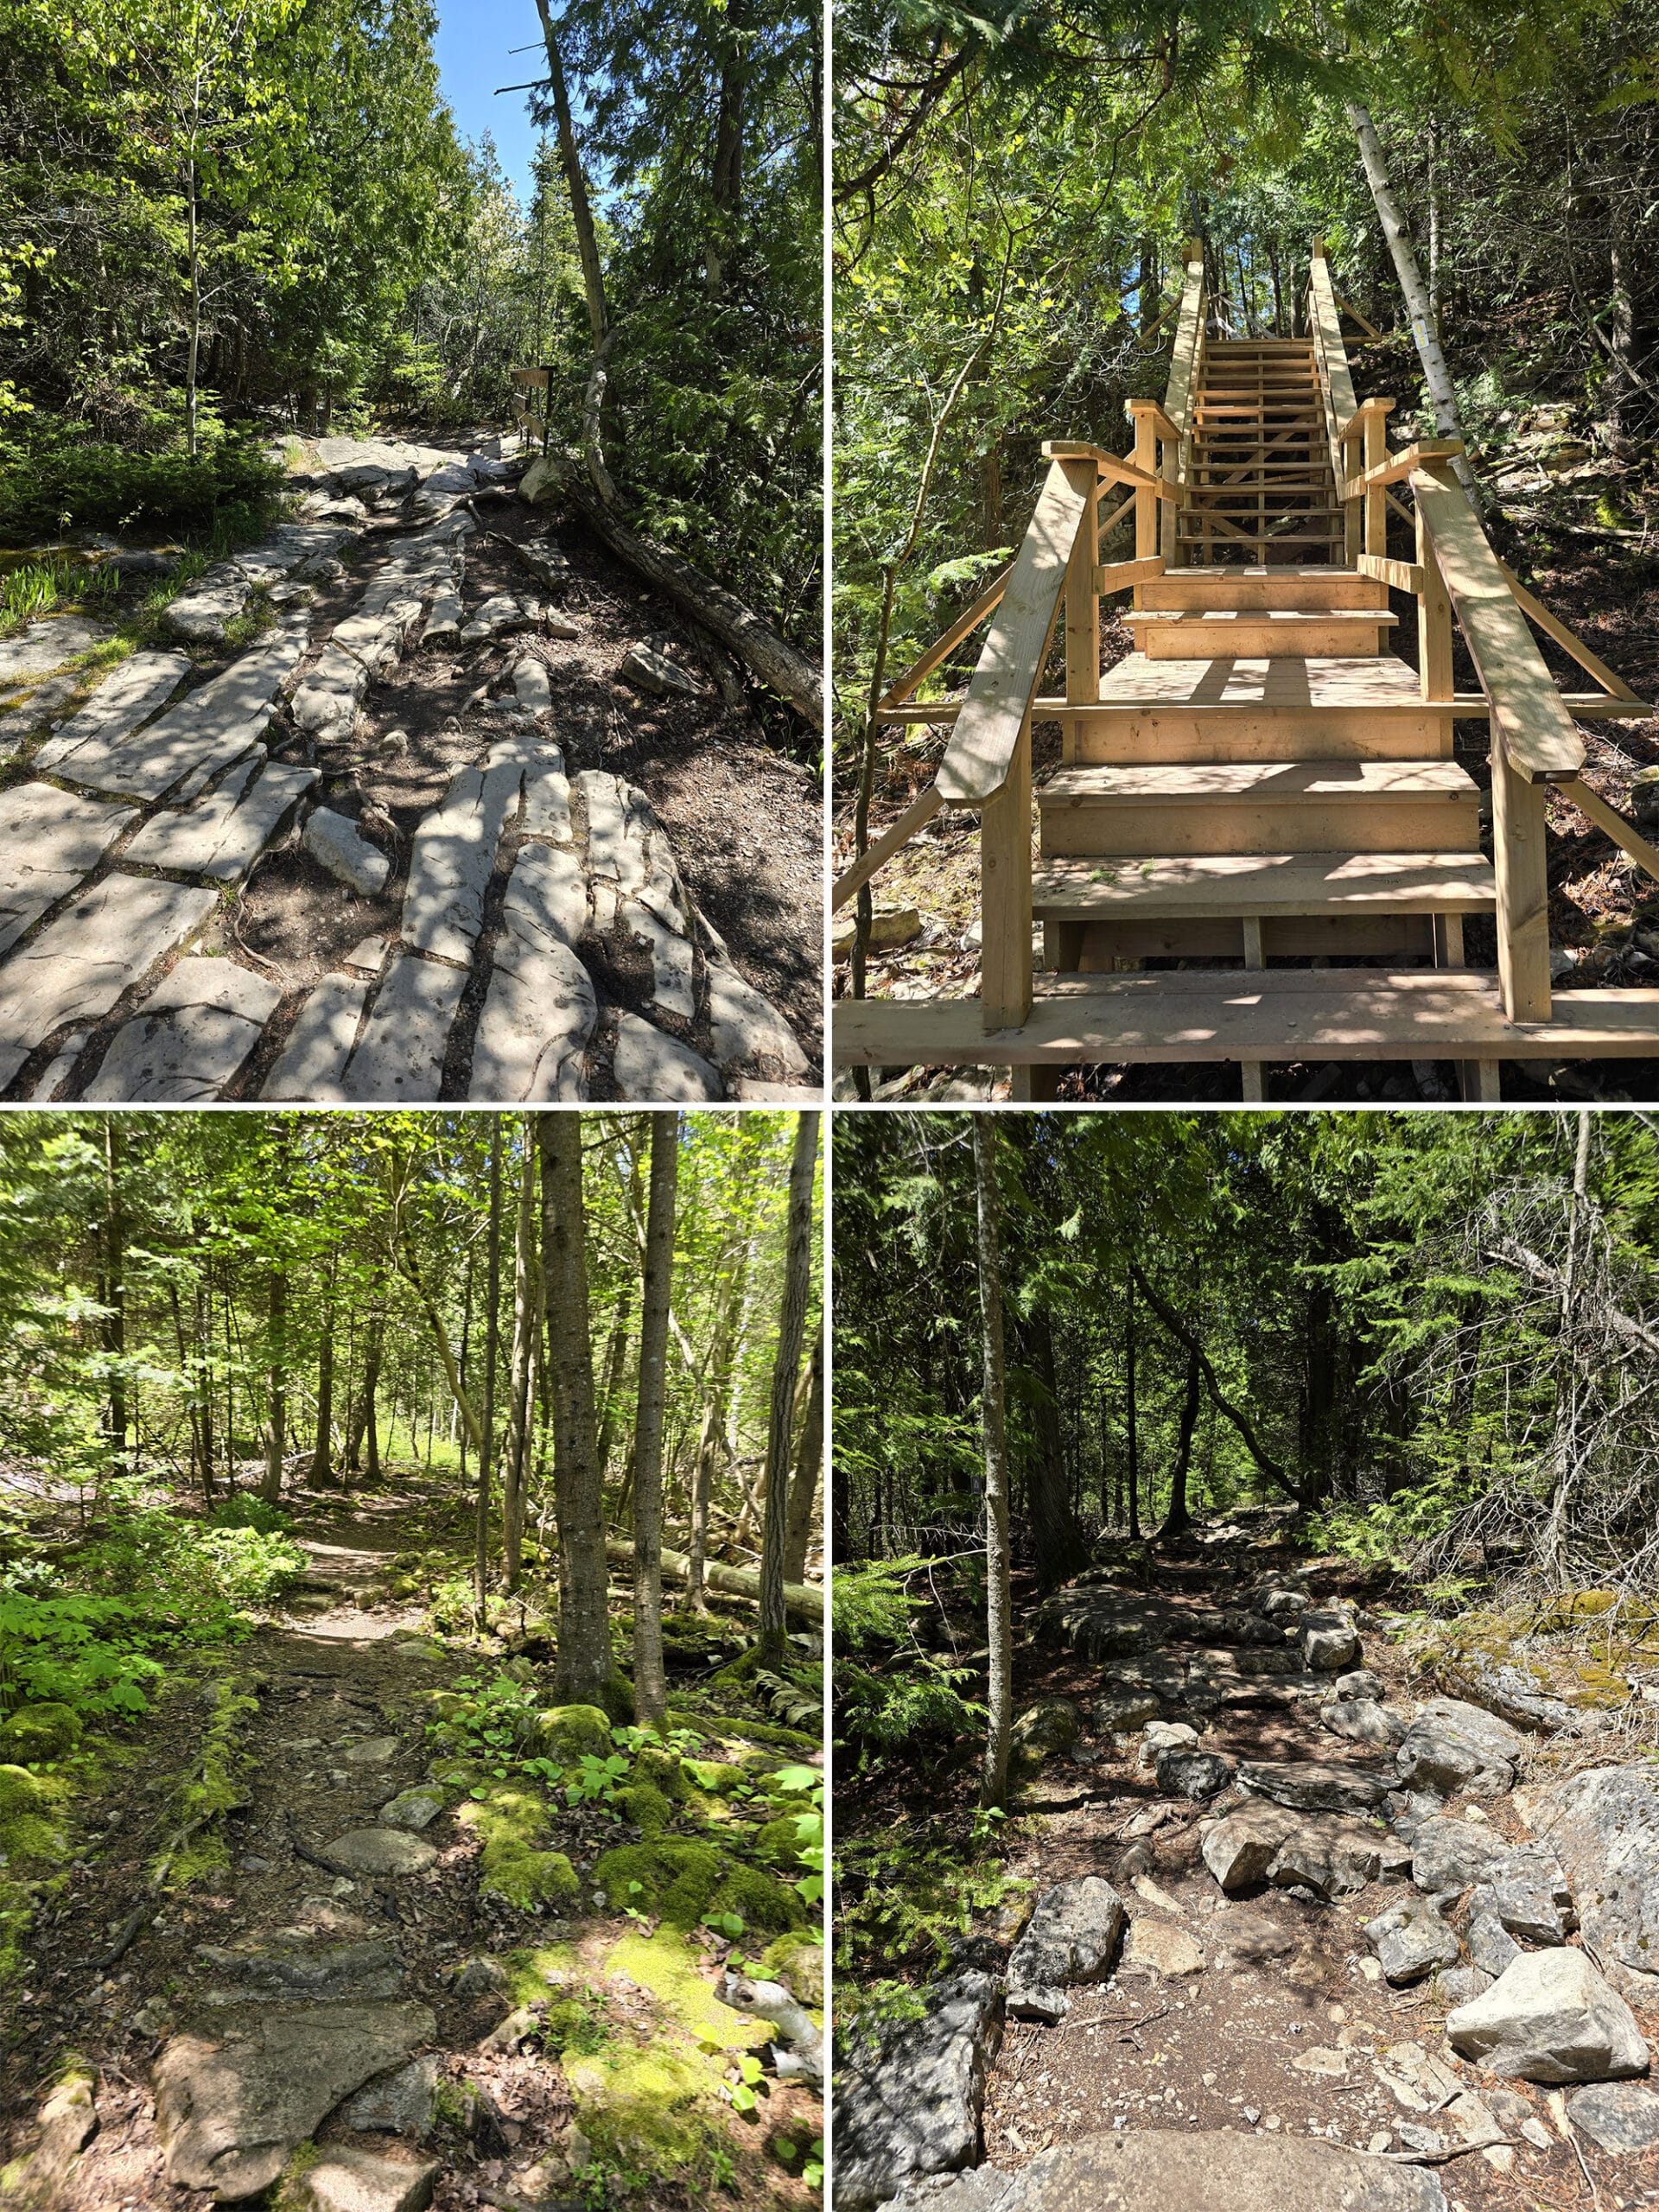 4 part image showing sections of the loop trail with stairs, big rocks, etc.